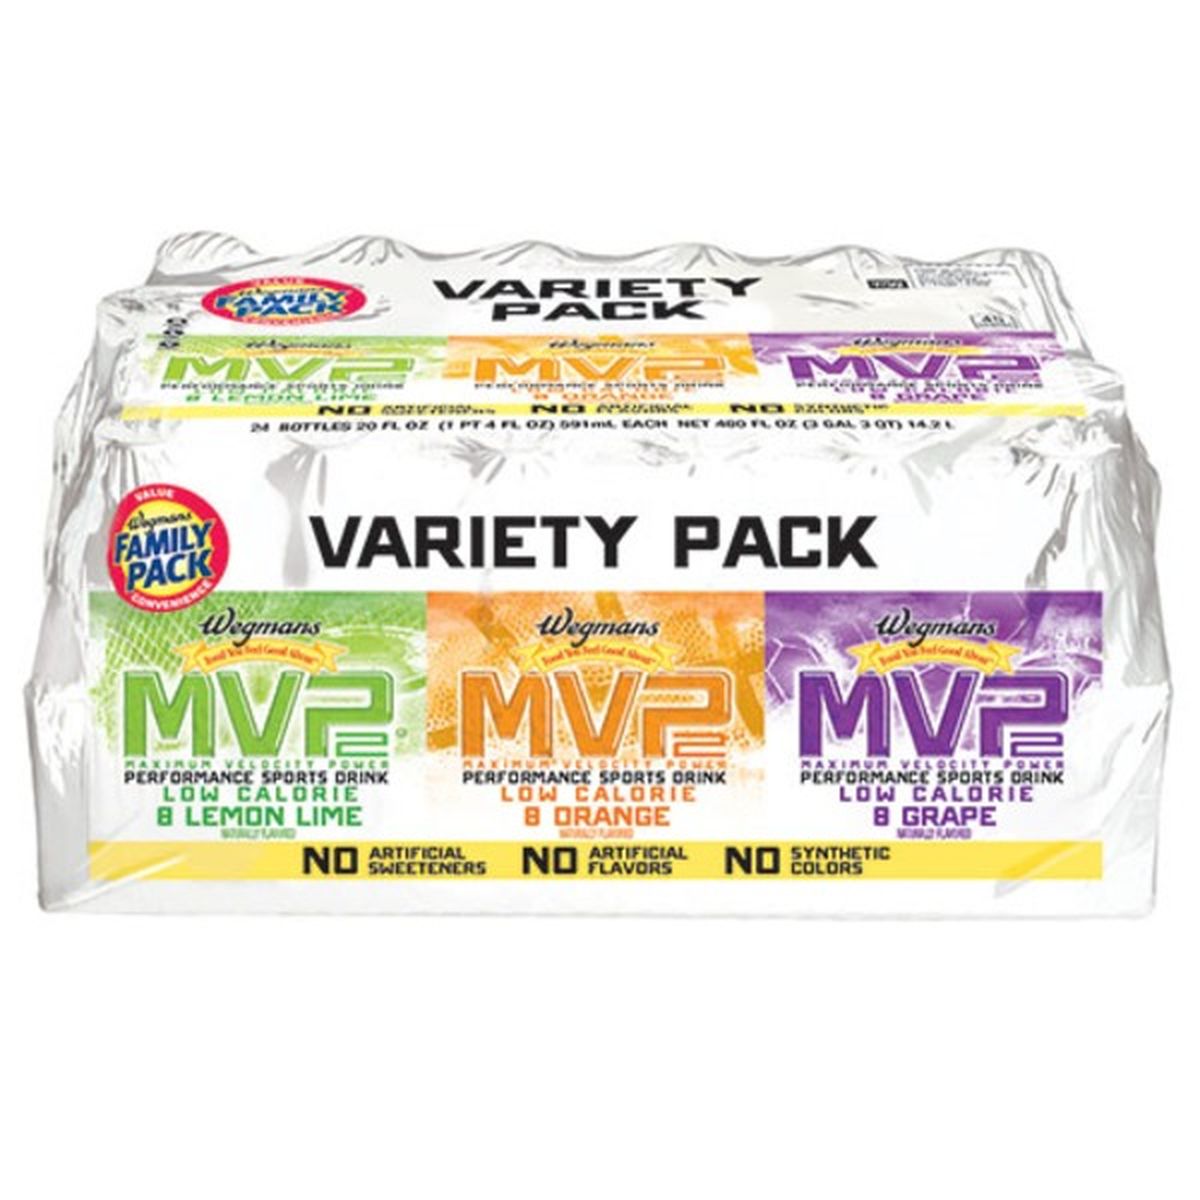 Calories in Wegmans MVP 2 Low Calories Sports Drink, Variety Pack FAMILY PACK